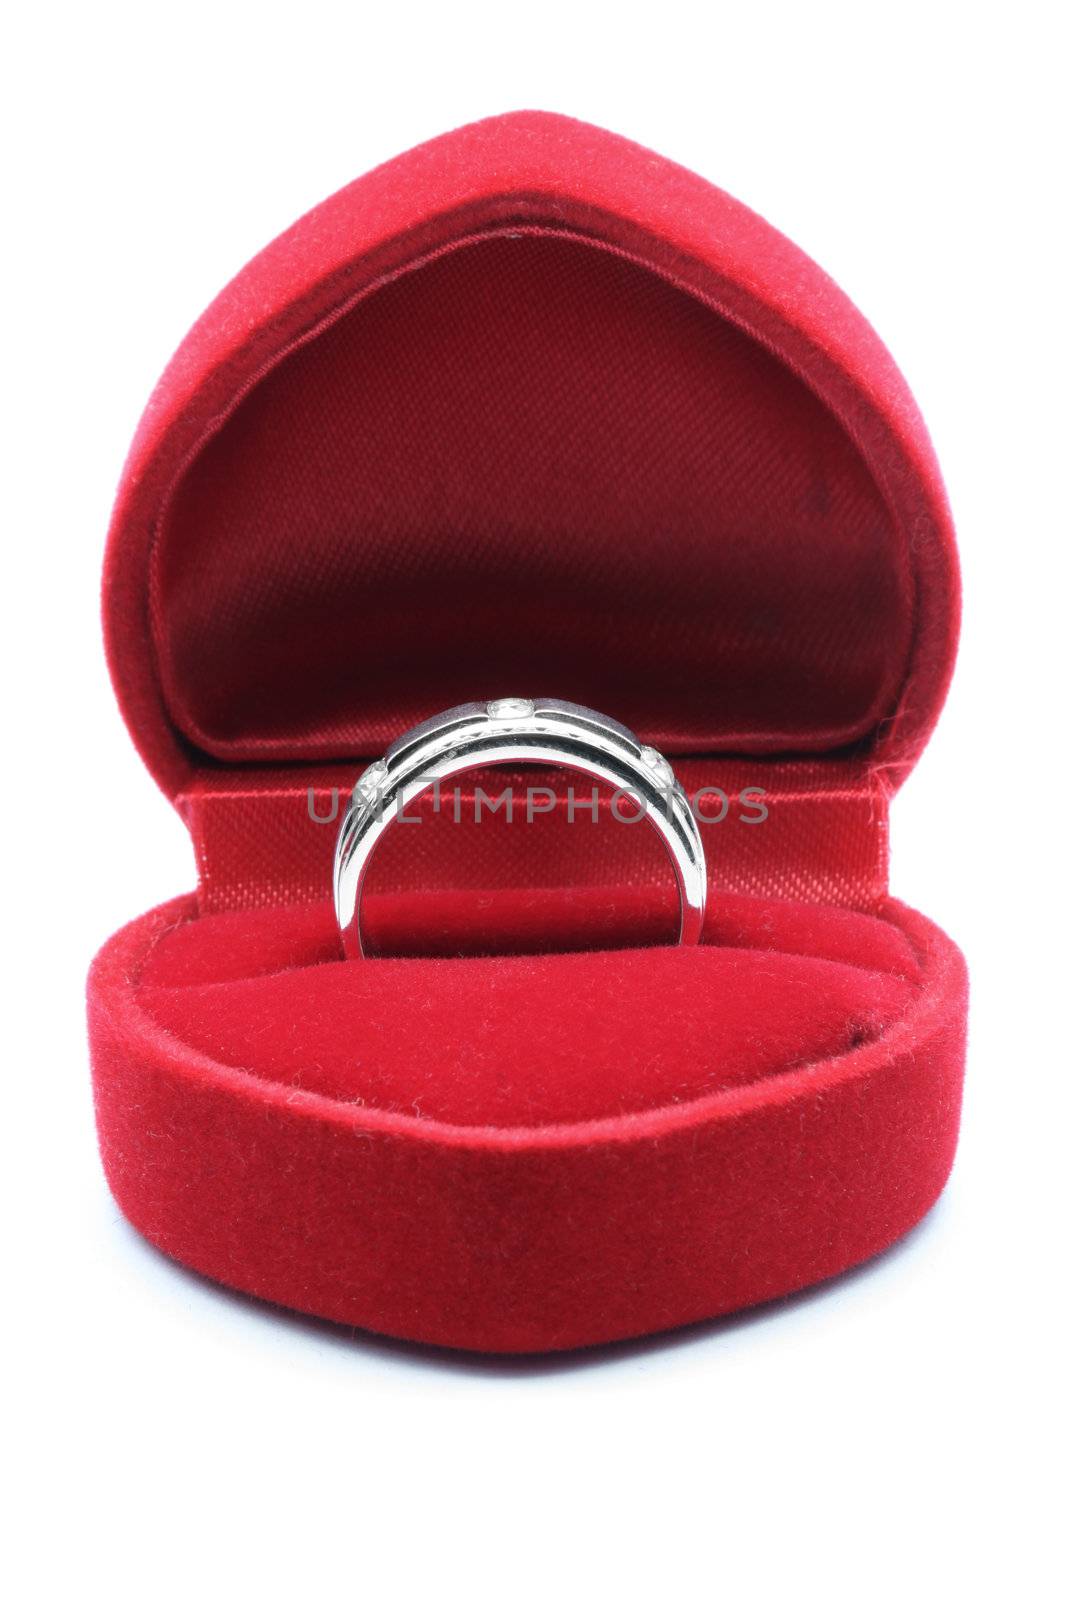 Luxury Diamond Wedding Ring in Red Velvet Silk Box using for Engagement for Love in Valentine Holiday Concept